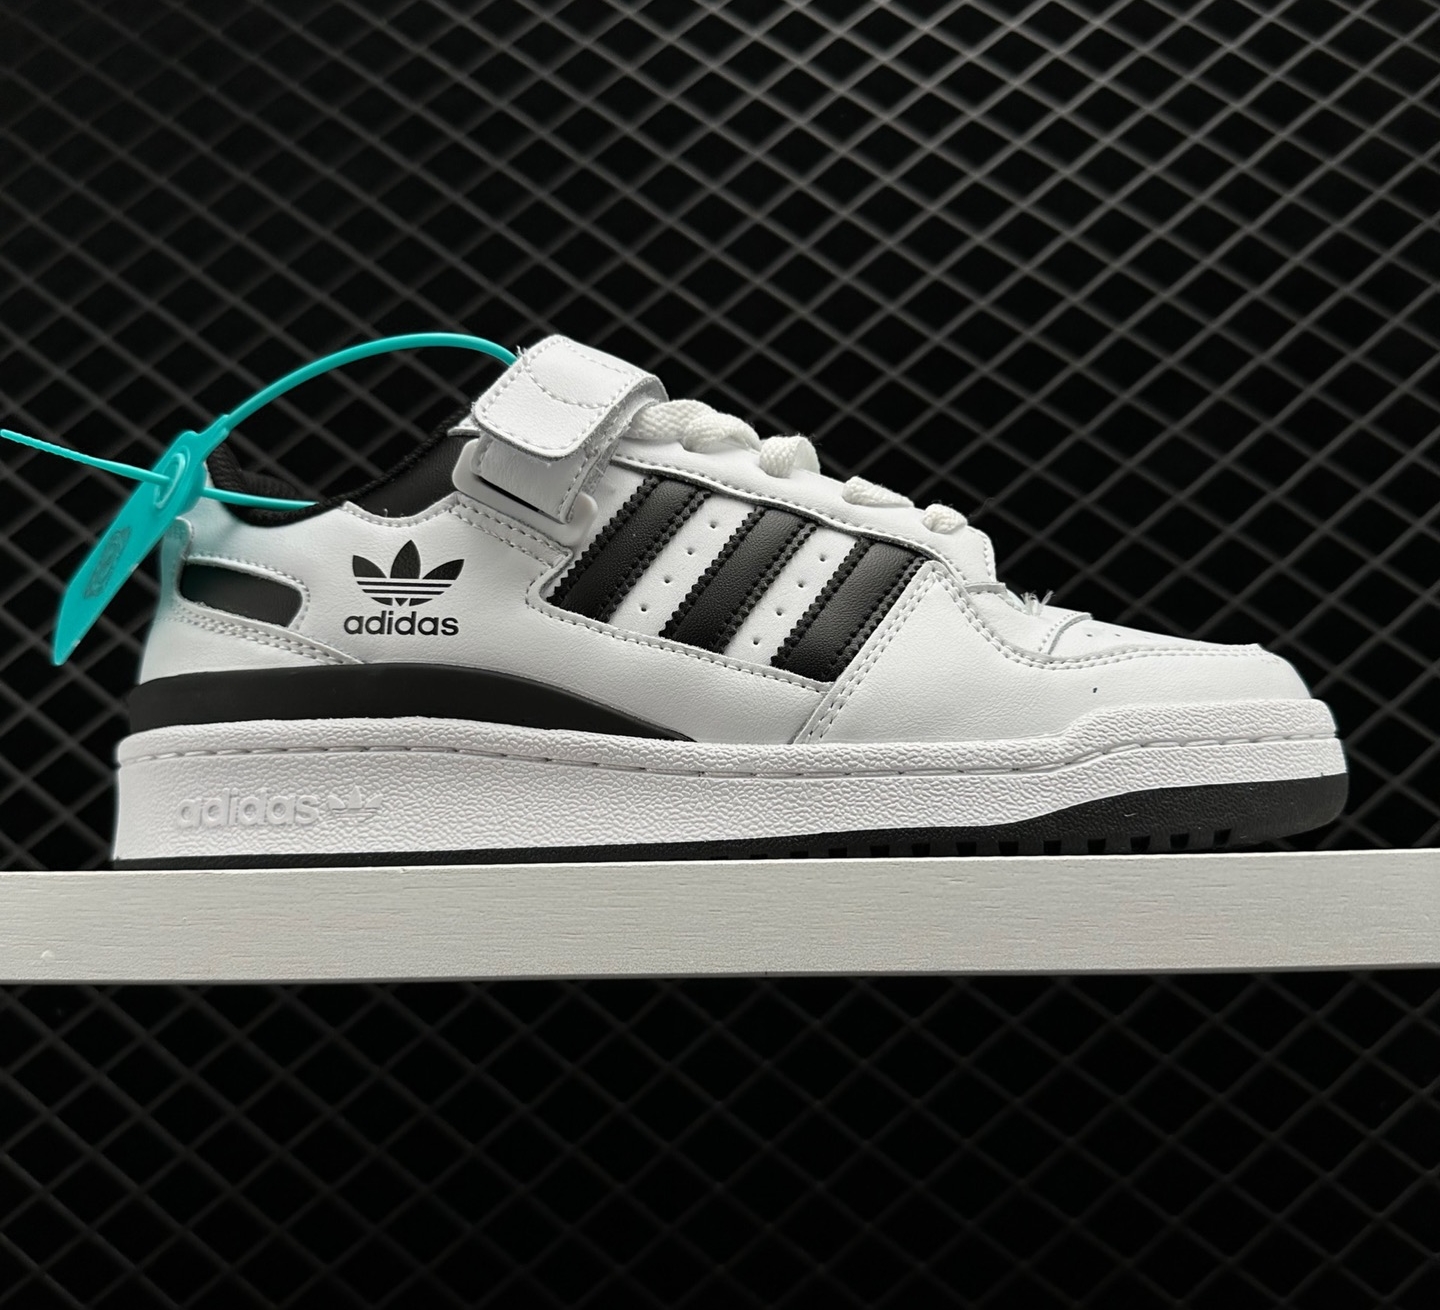 Adidas Forum Low 'White Black' FY7757: Classic Style for Sneaker Enthusiasts!